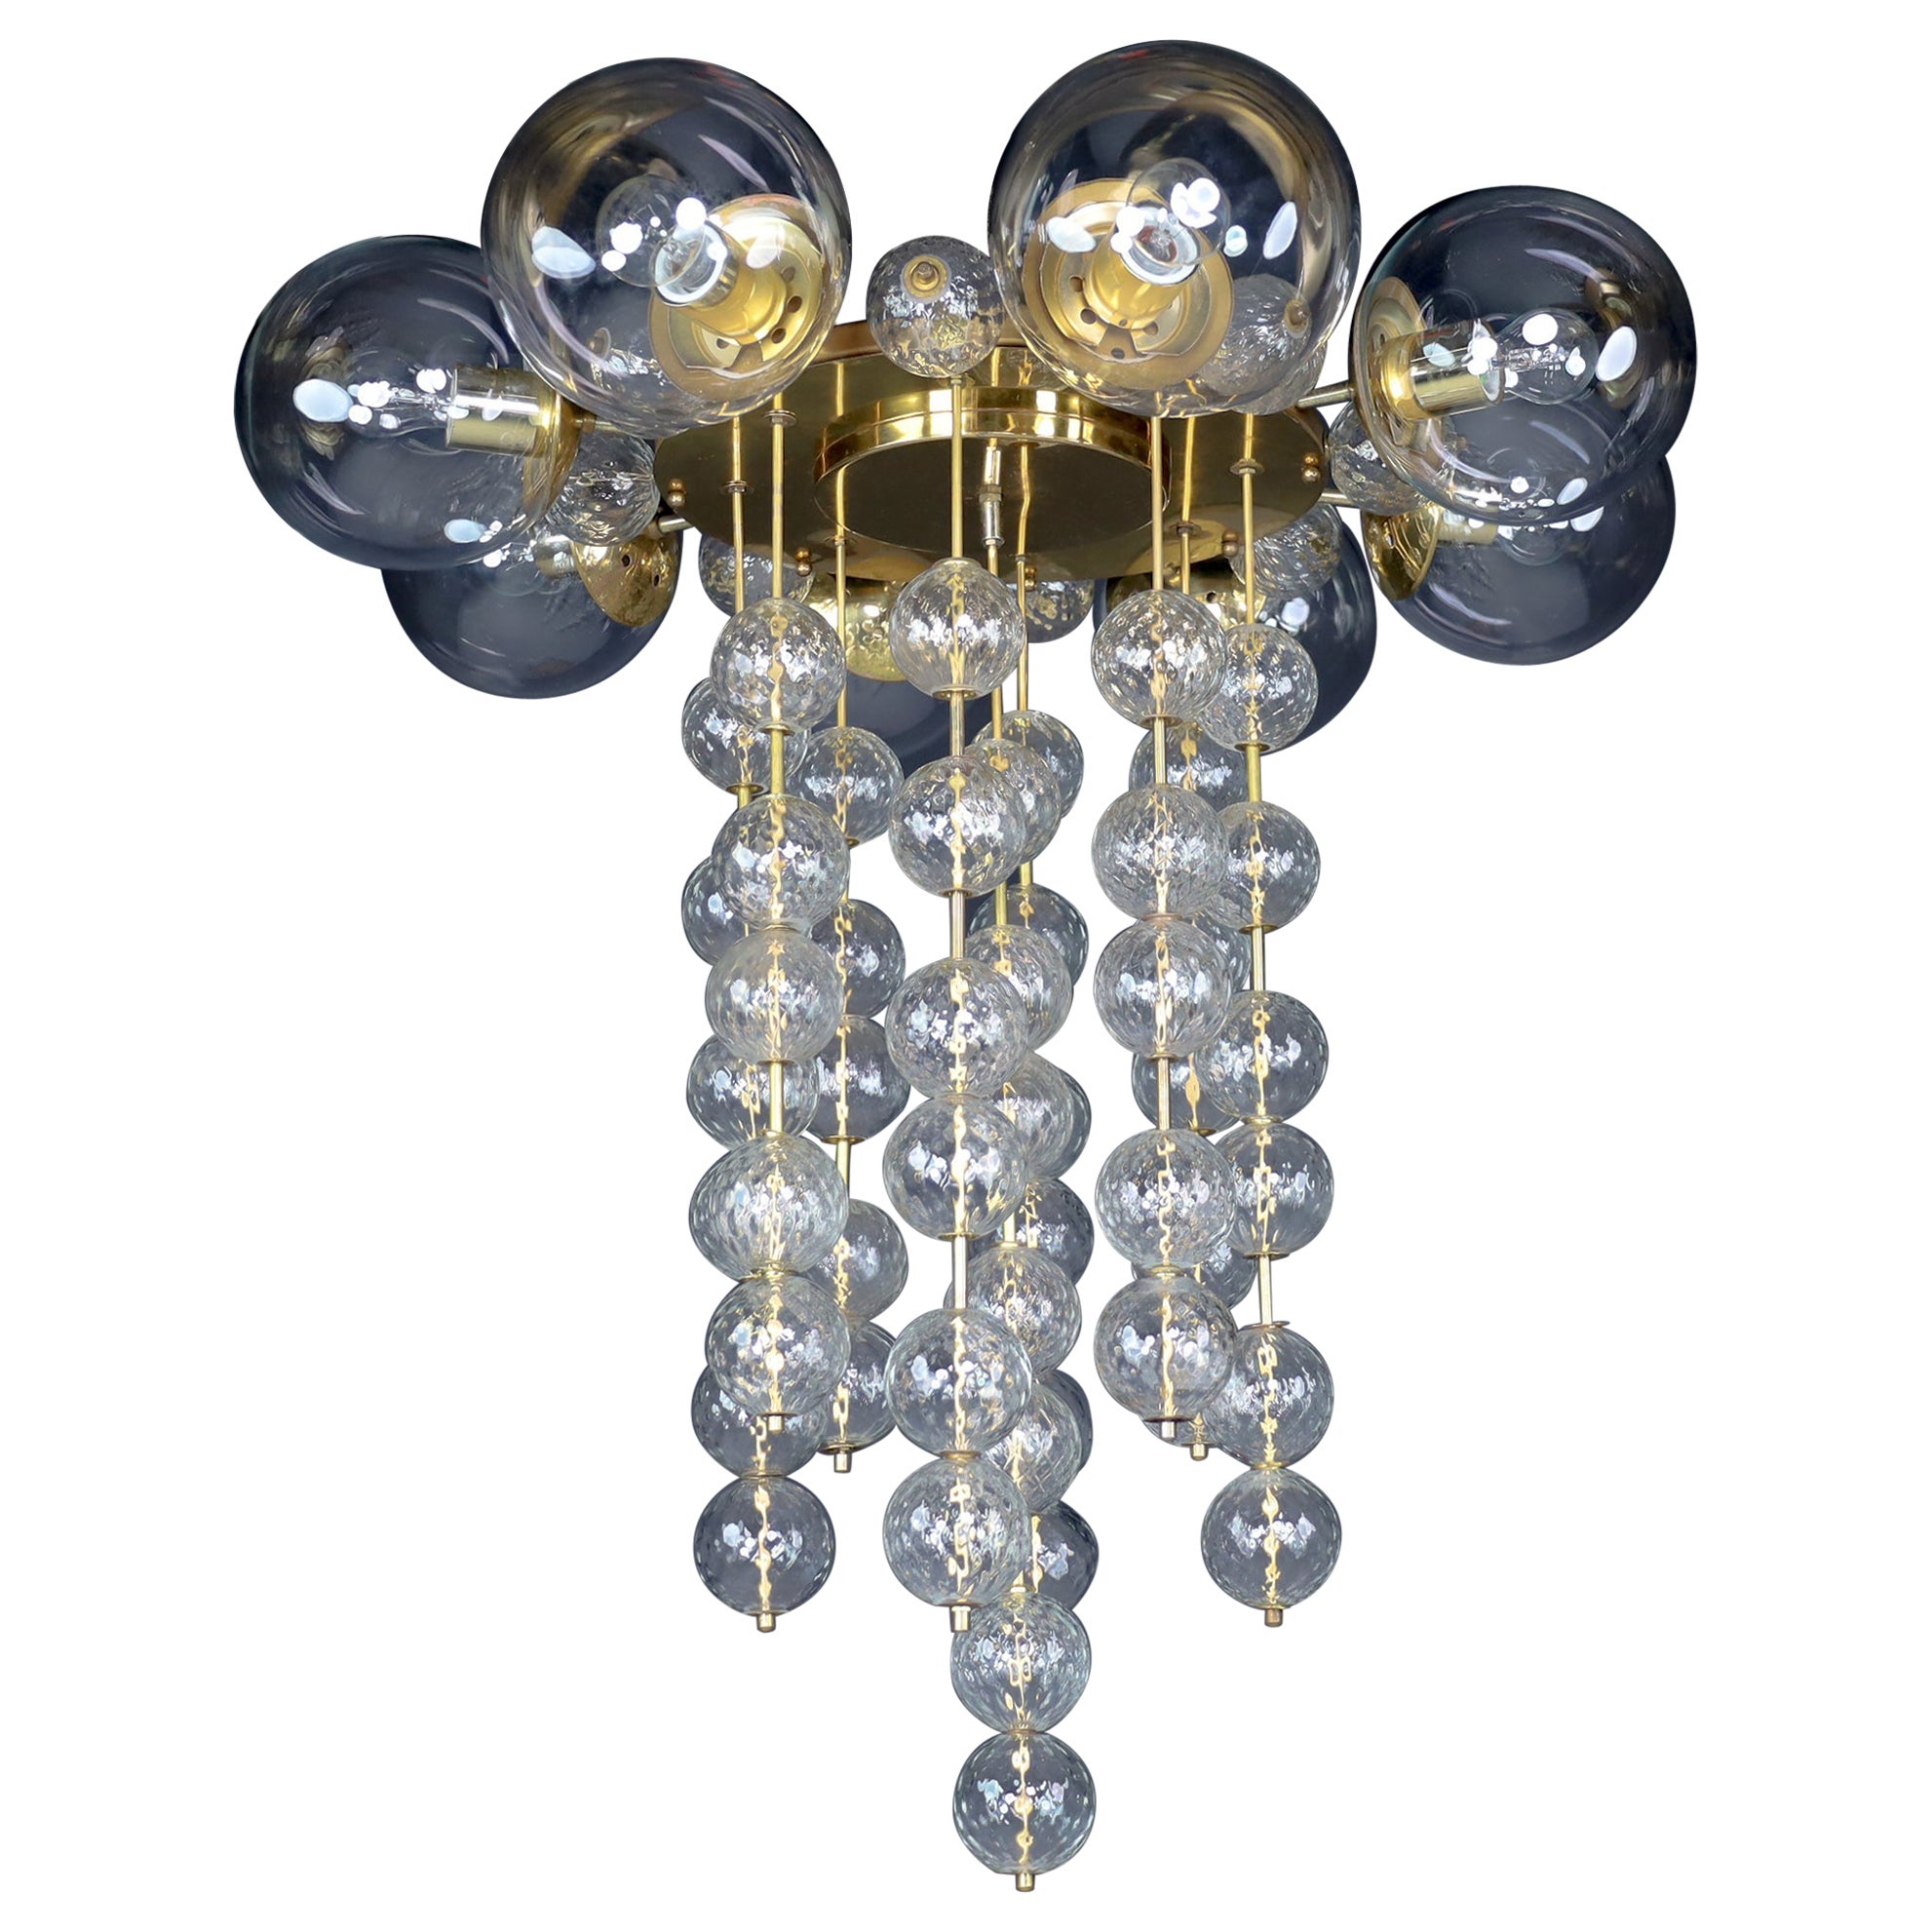 Grand Chandelier with Brass Fixture and Hand-blowed Glass Globes, 1960s For Sale